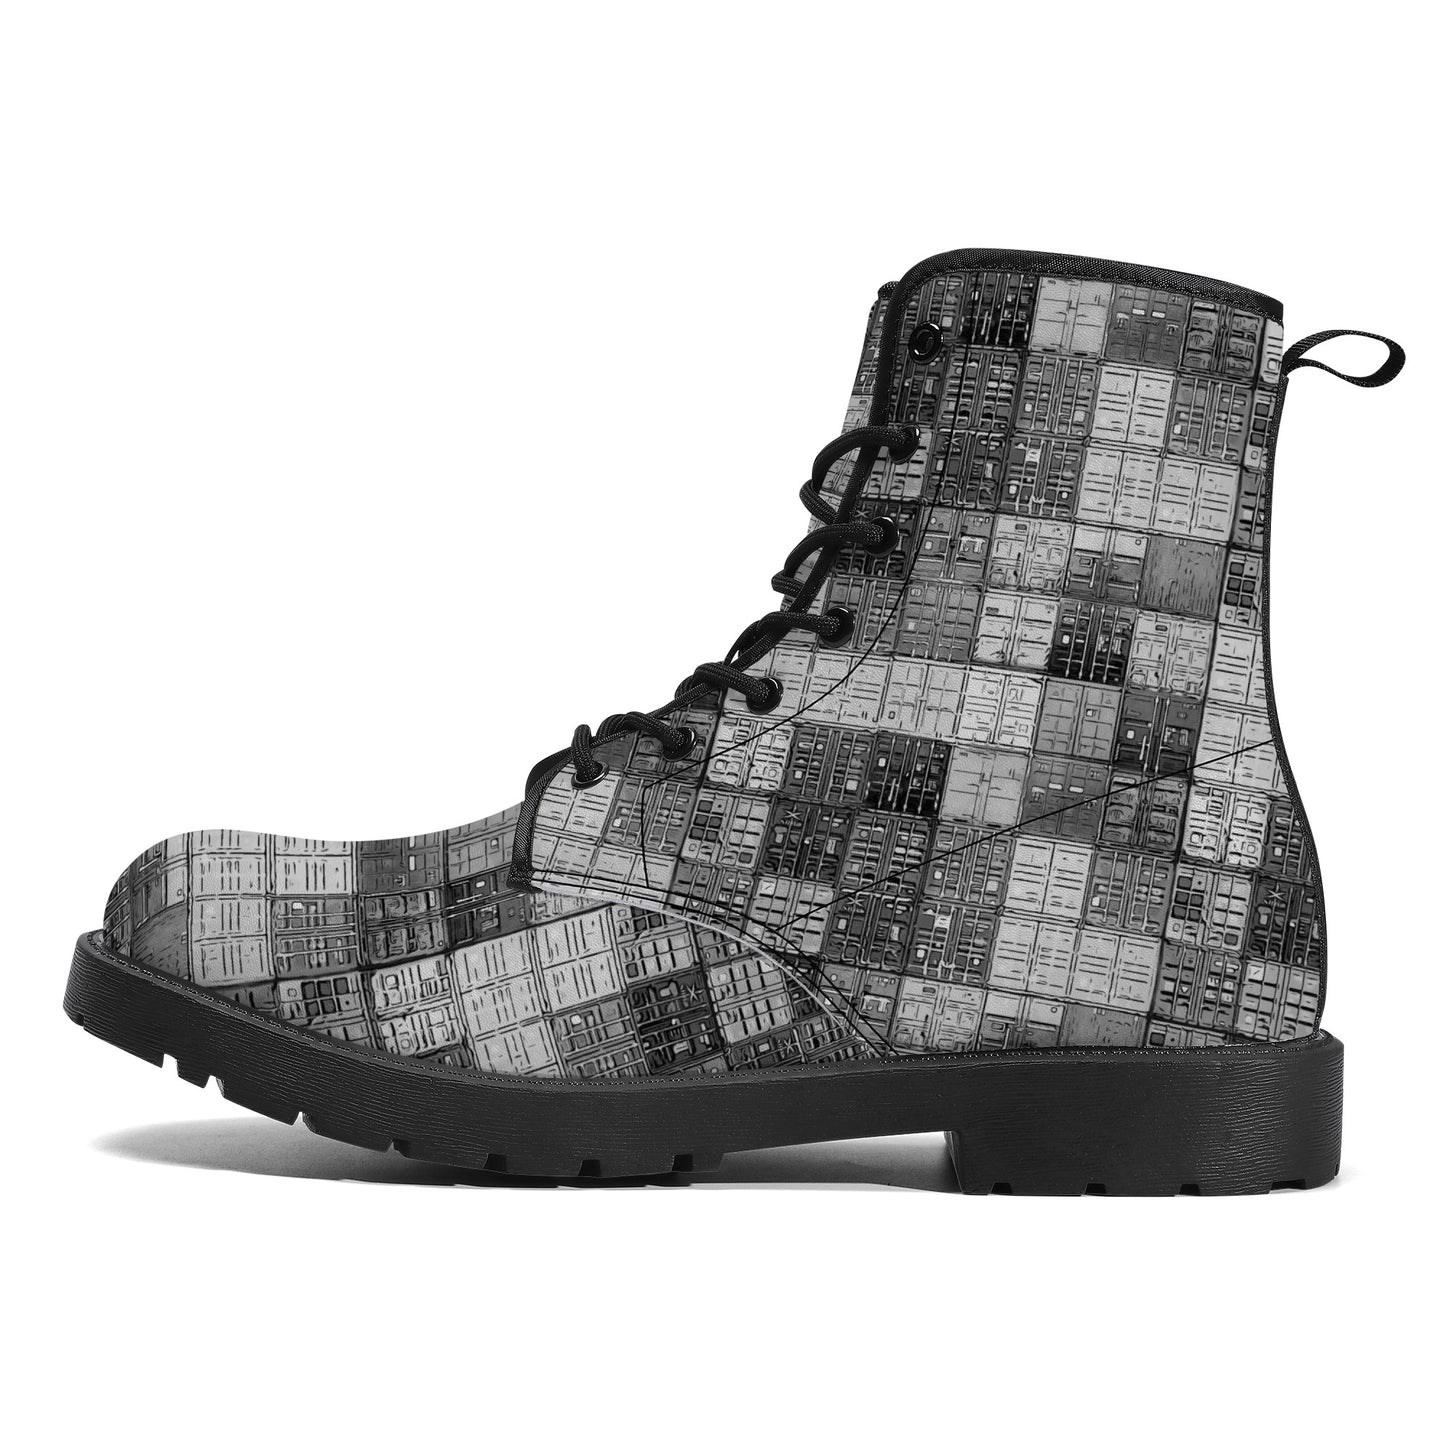 "Mono Shipping Containers" Eco-friendly Boots